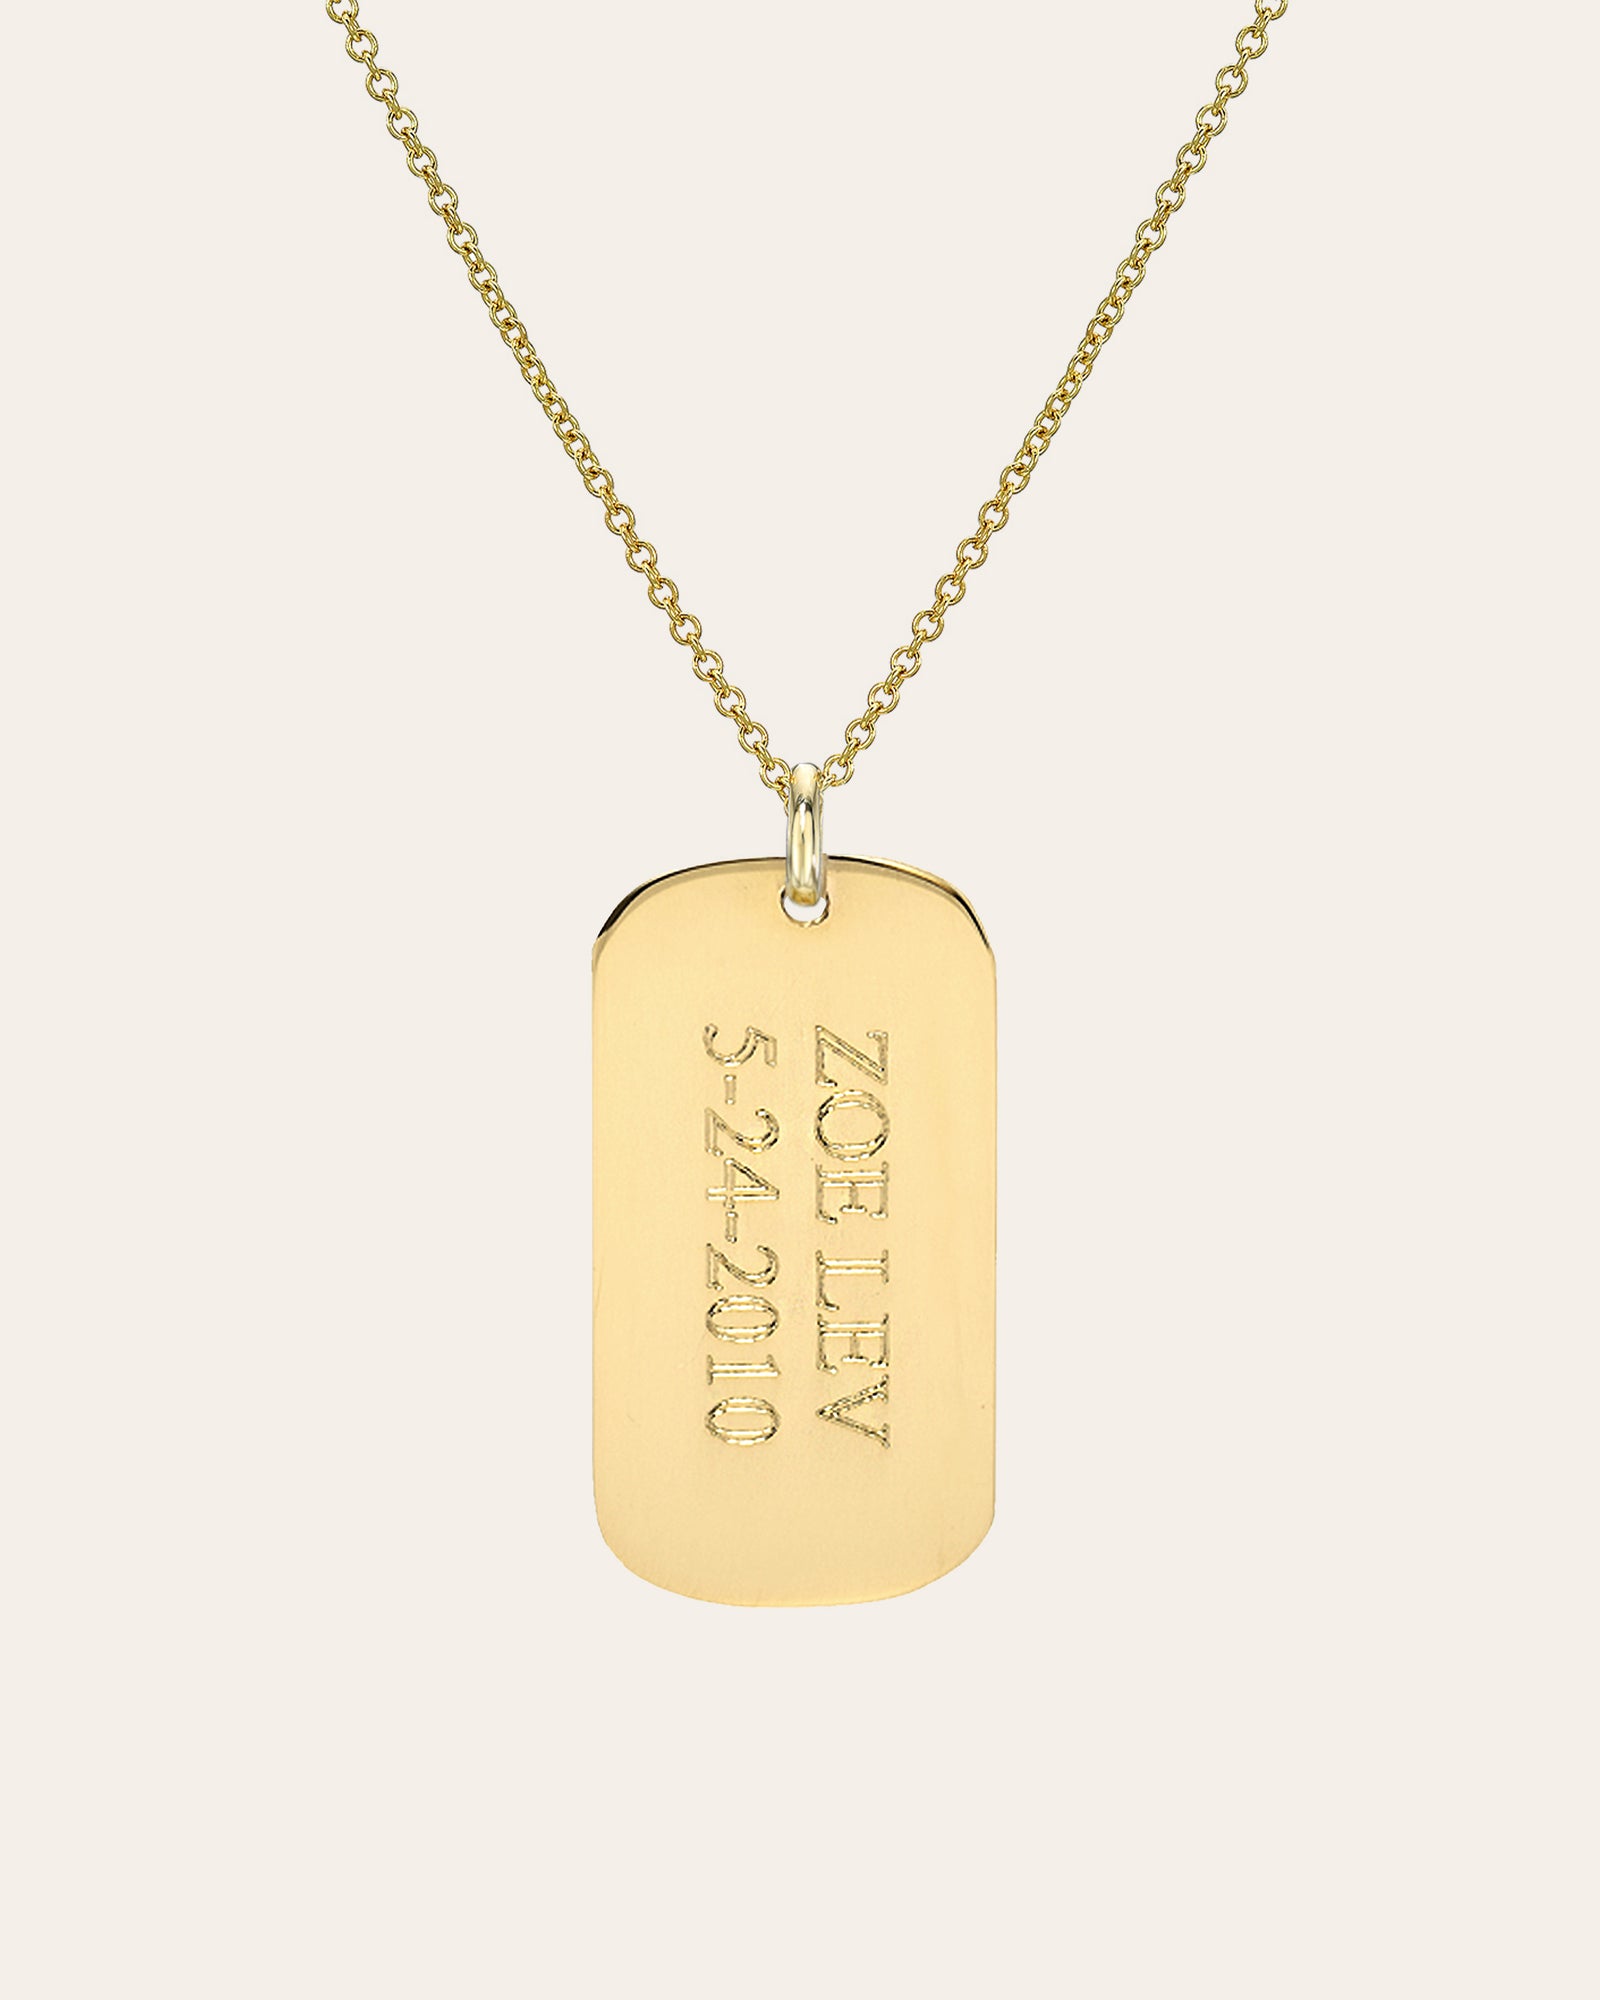 Engravable Dog Tag with Bead Chain Necklace 14K Gold